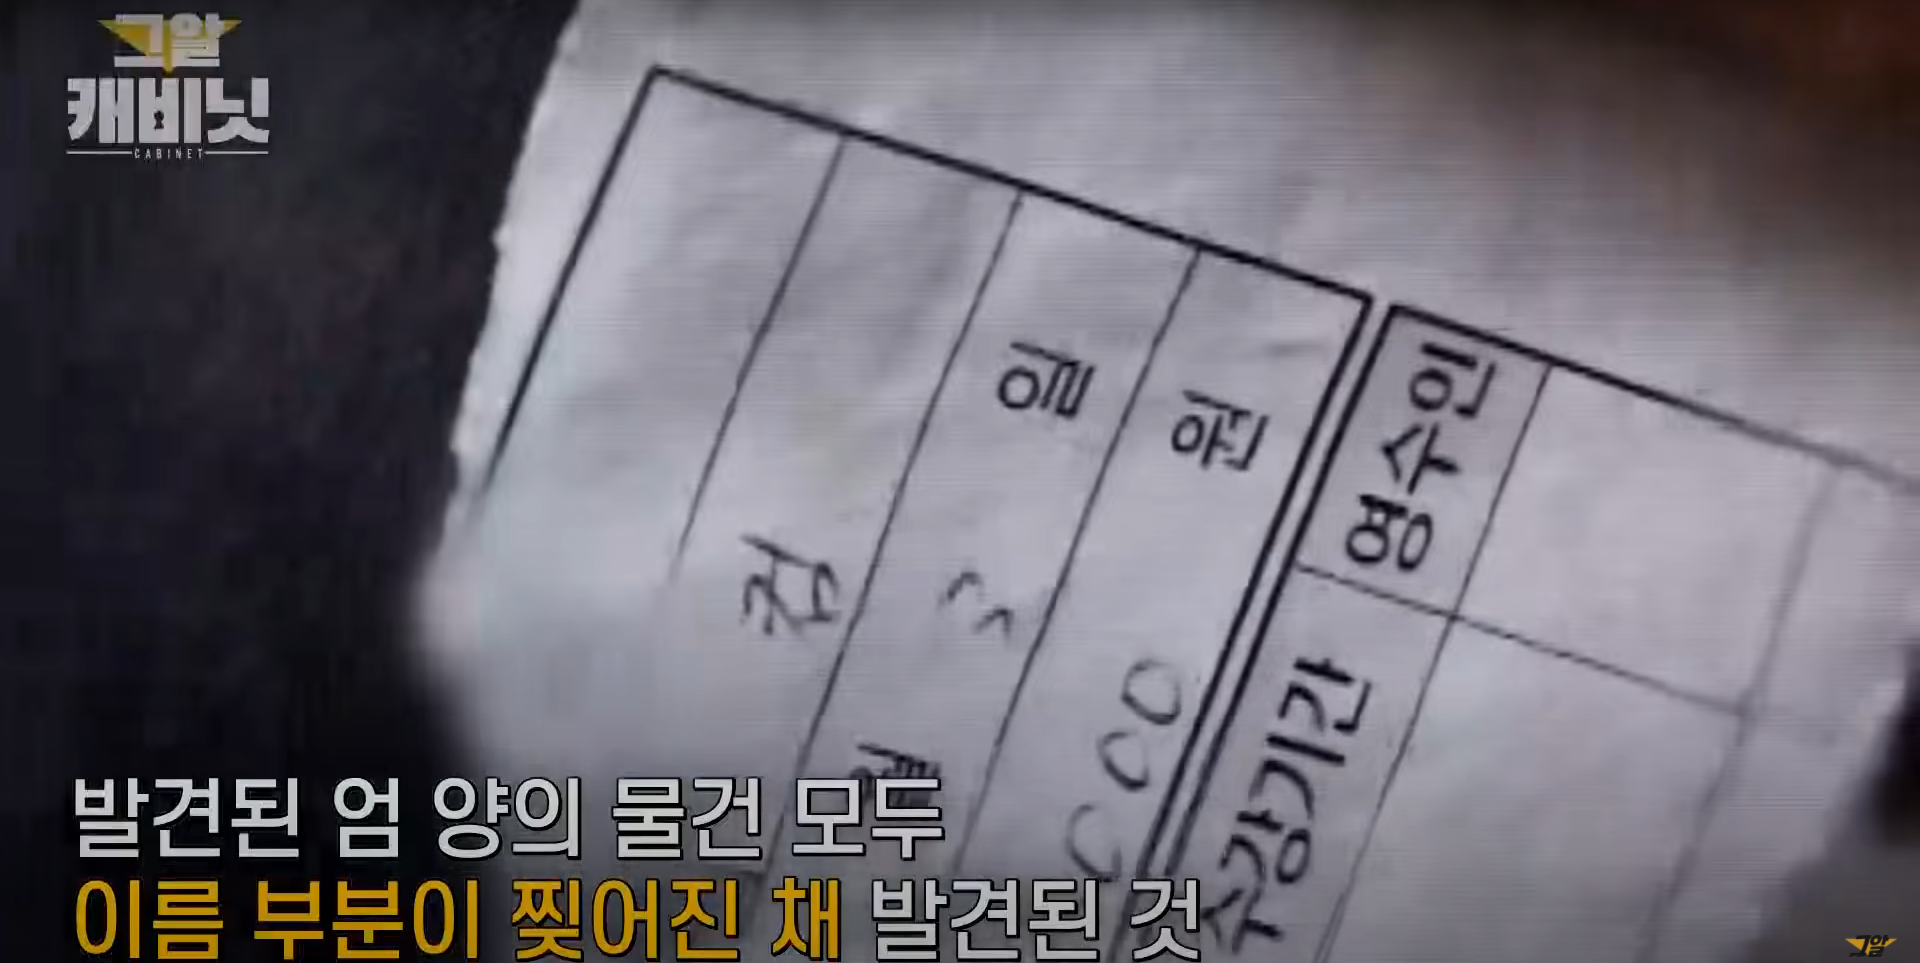 unsolved crimes in korea - victim's notebook